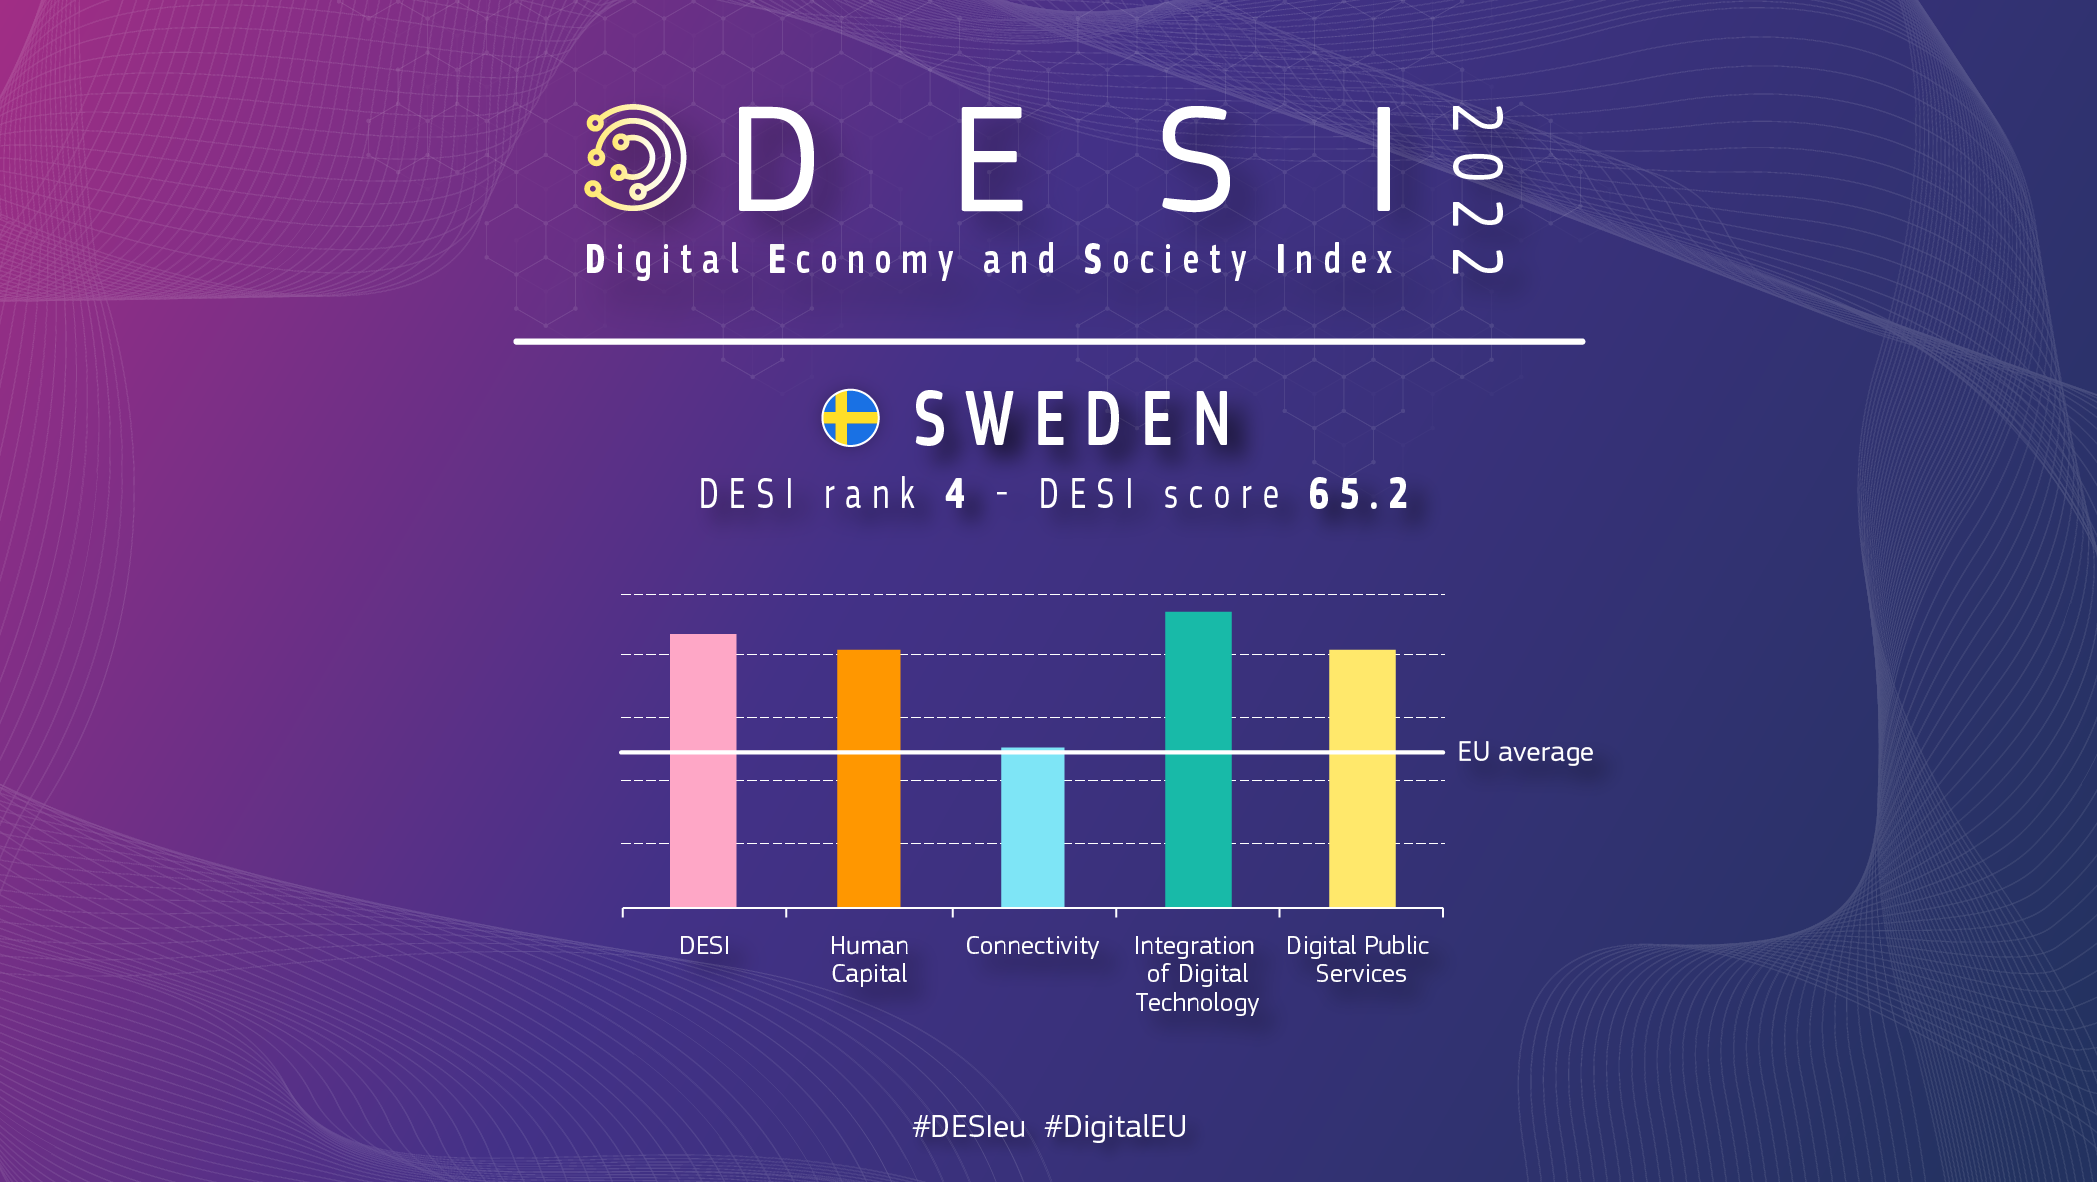 Graphic overview of Sweden in DESI showing a ranking of 4 with a score of 65.2